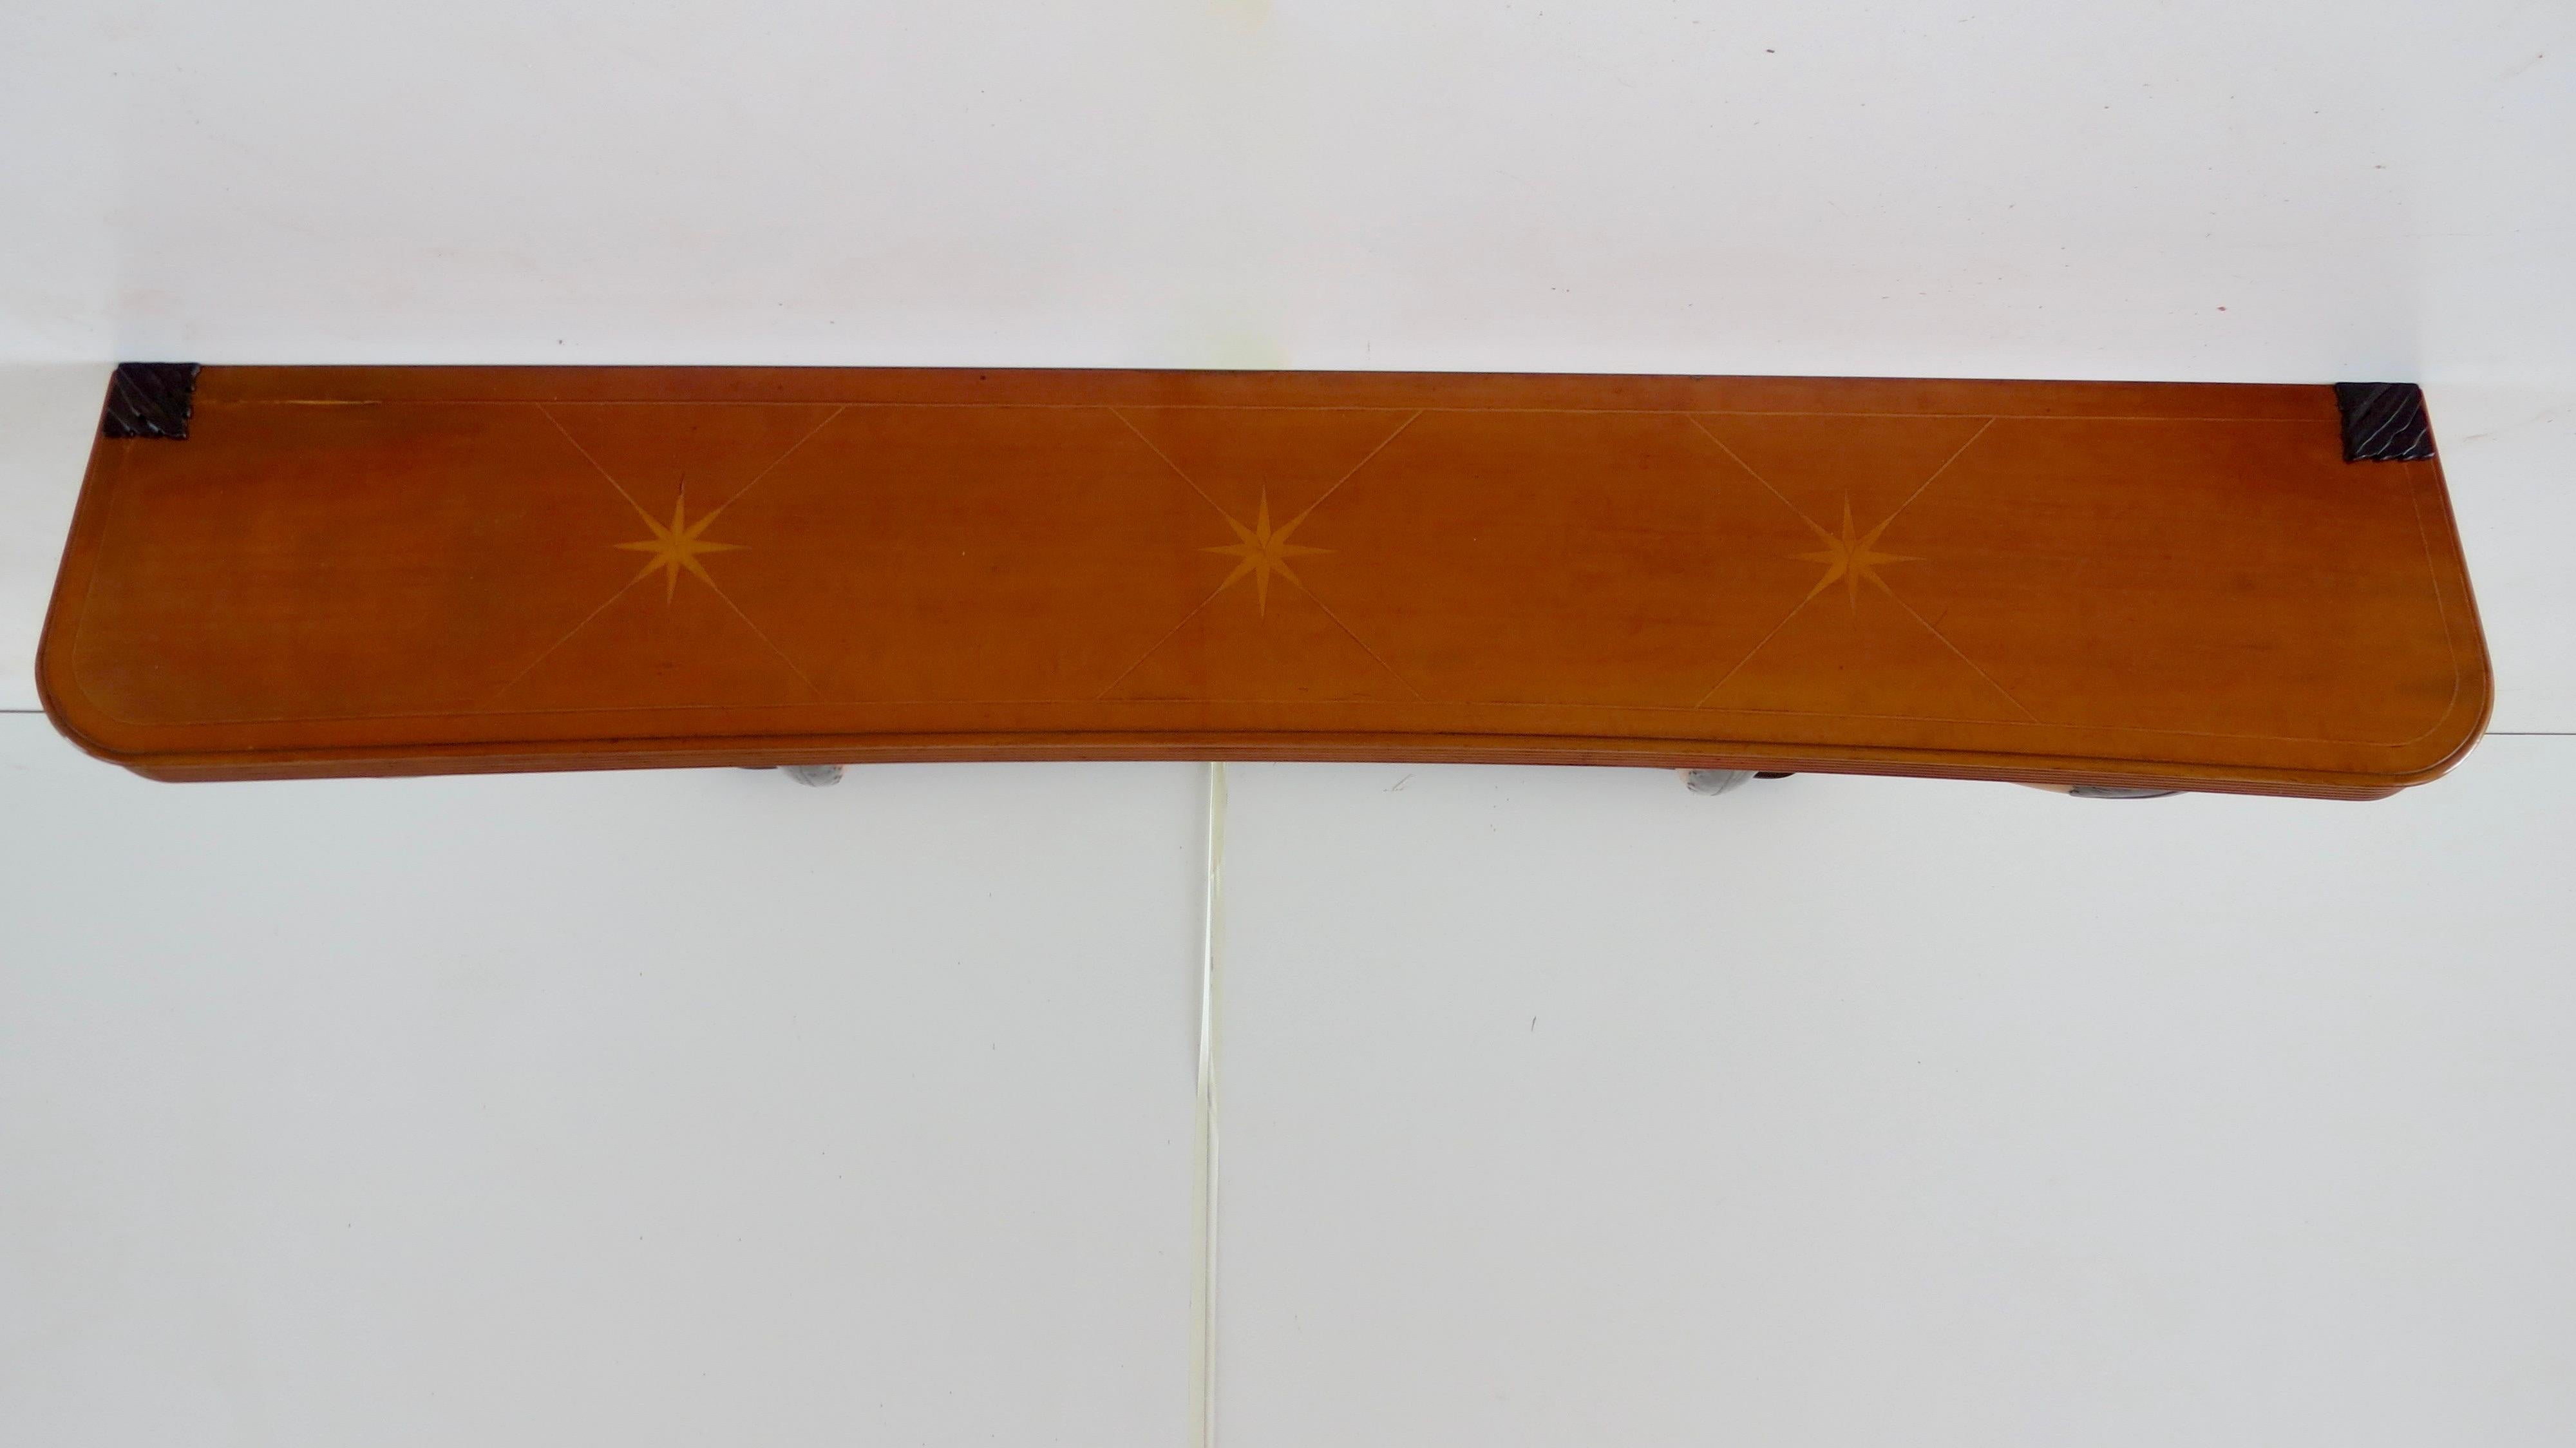 Art Deco Large Important Inlaid Cherrywood Wall Console Tomaso Buzzi Attributed, c. 1940